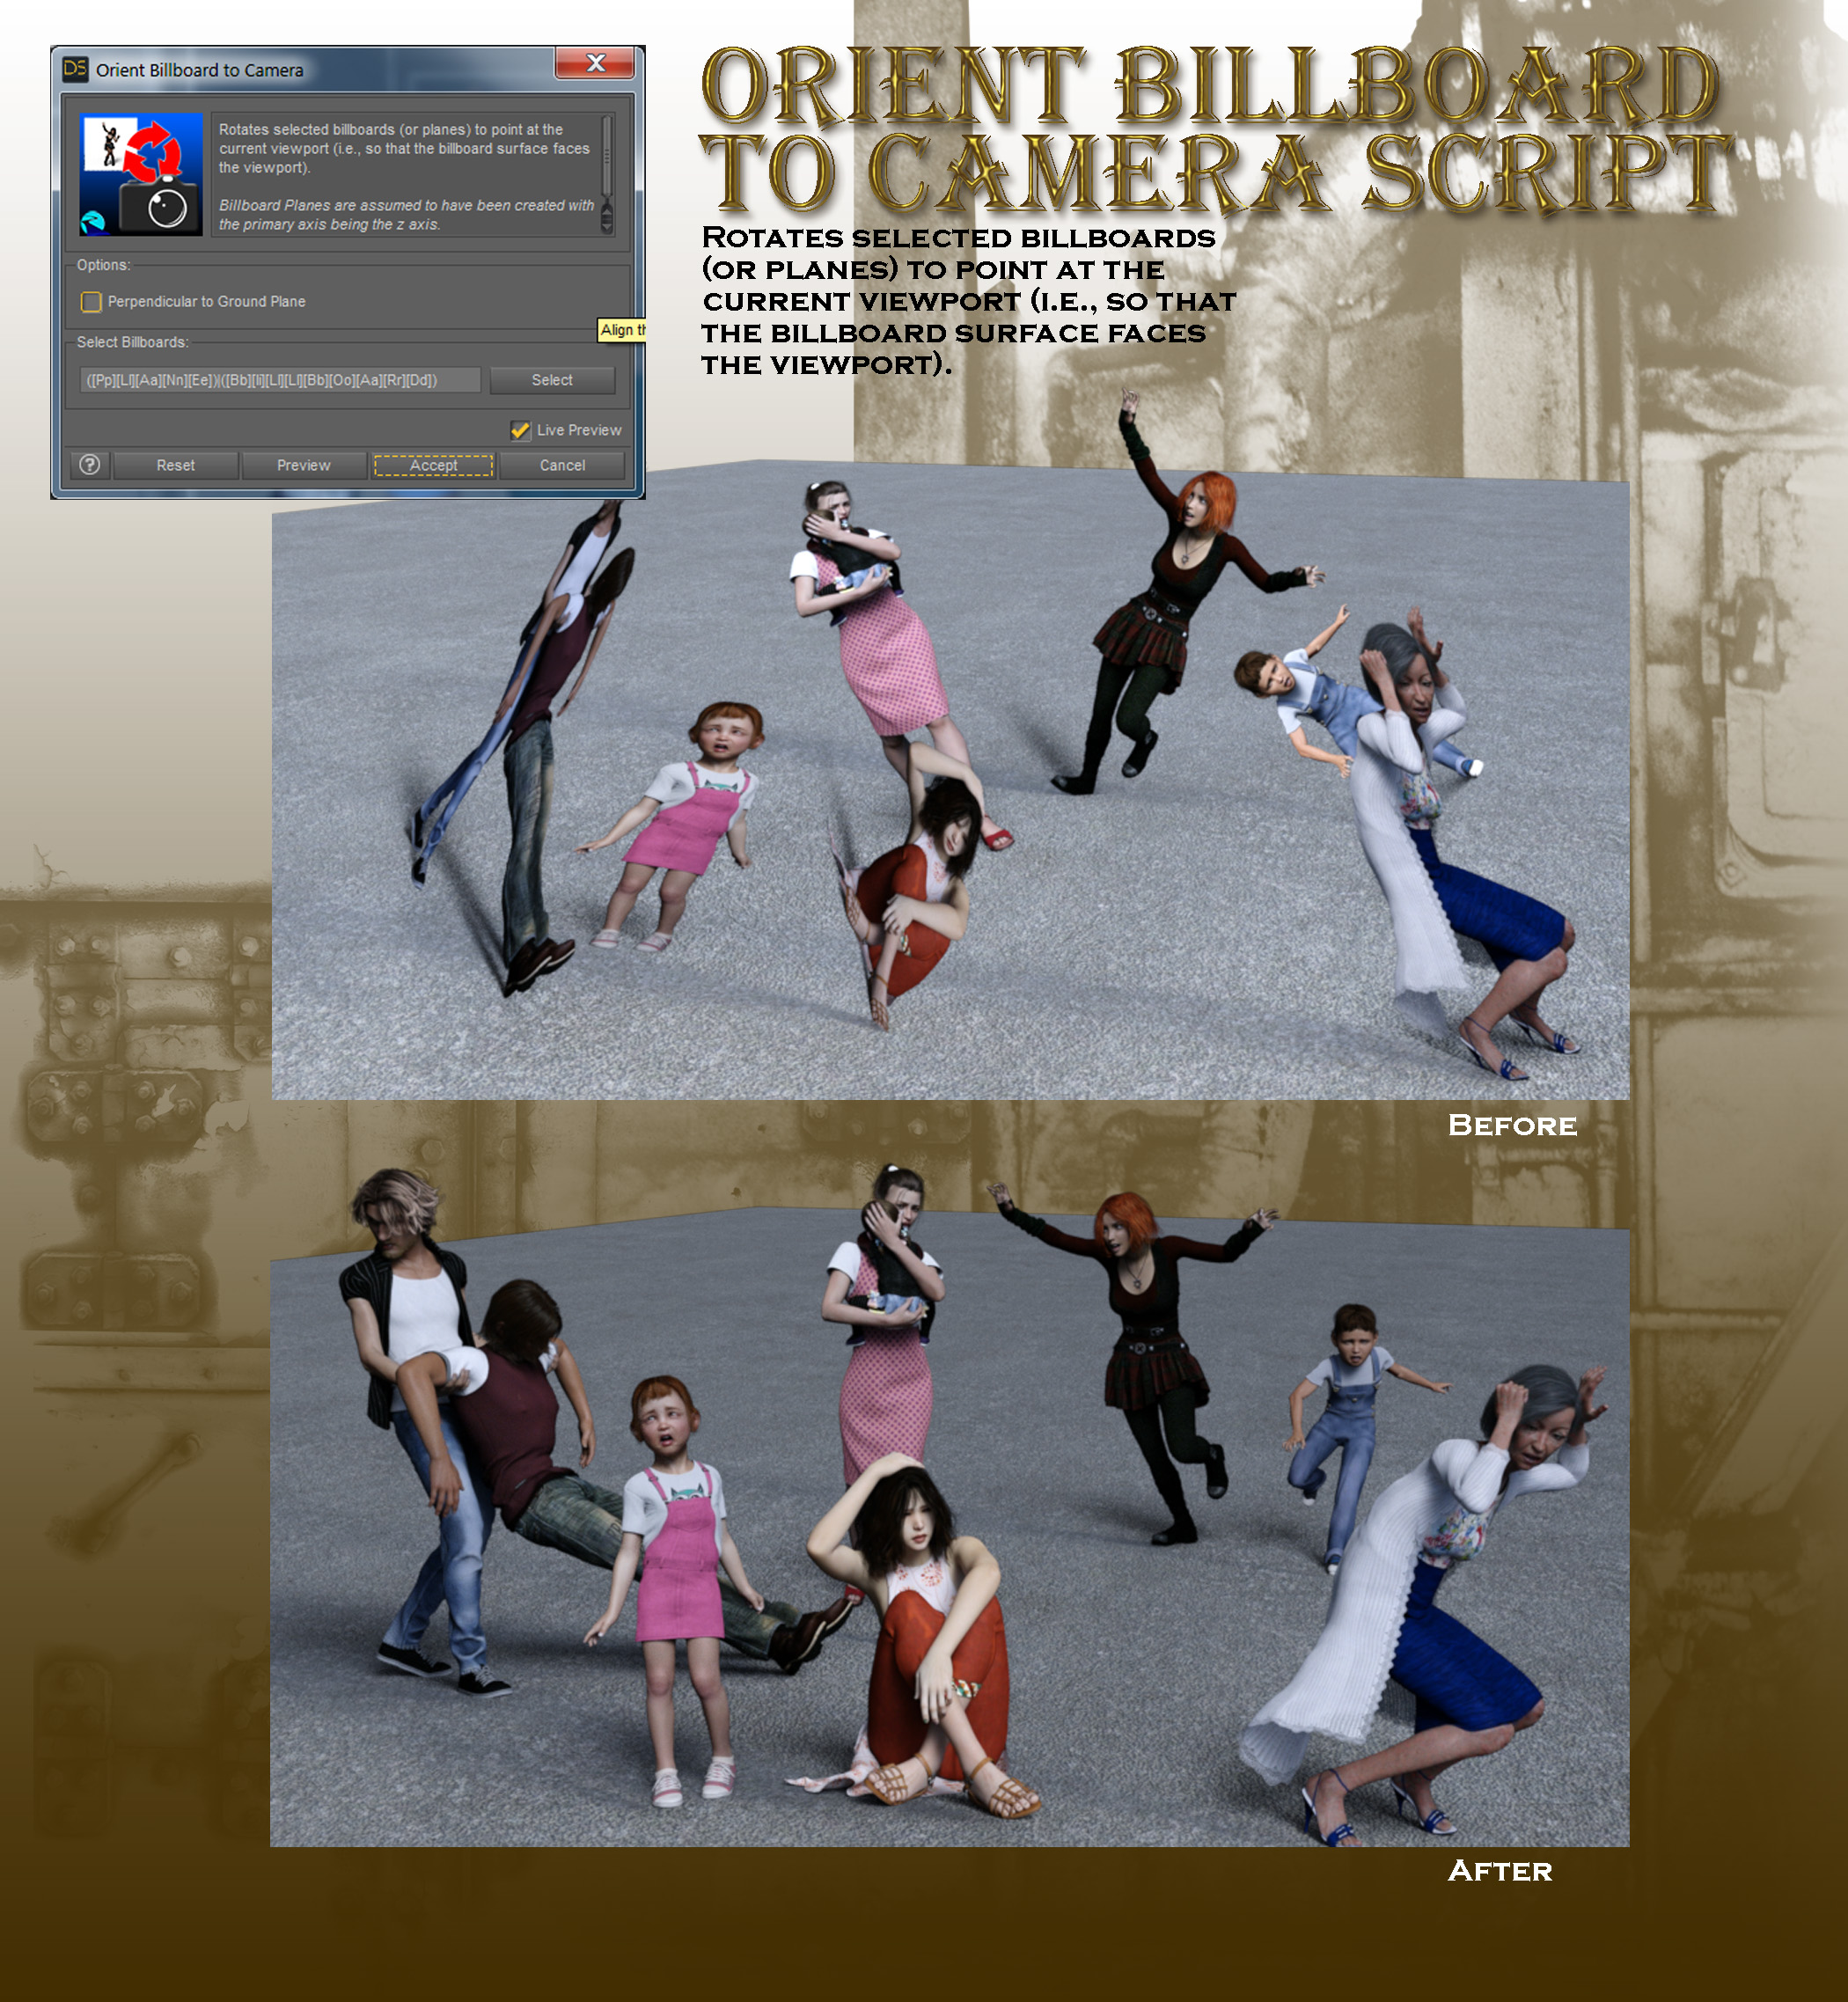 Now-Crowd Billboards - Disaster! by: RiverSoft Art, 3D Models by Daz 3D